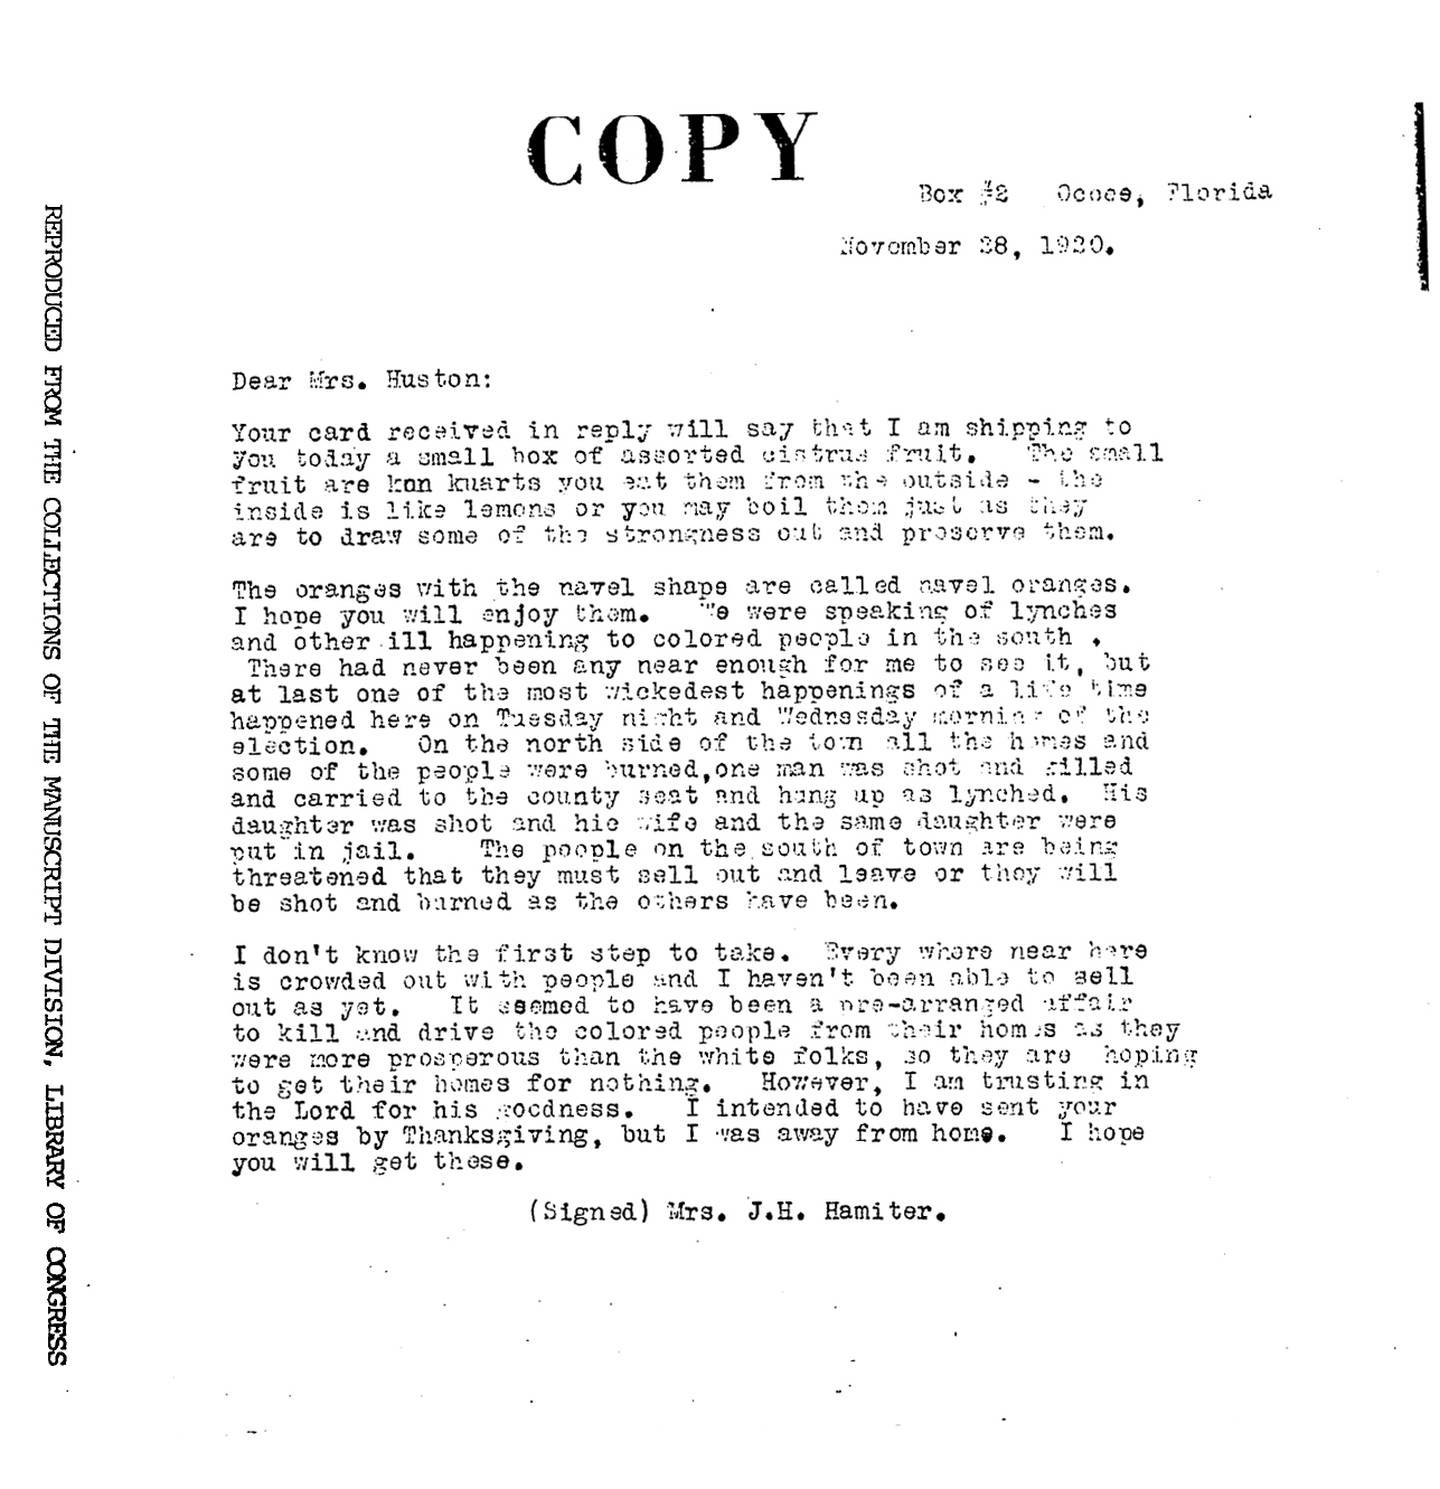 Annie Hamiter wrote a letter describing the chaos that ensued in Ocoee in the days after the massacre as whites tried to “kill and drive the colored people from their homes,” Hamiter wrote.te.